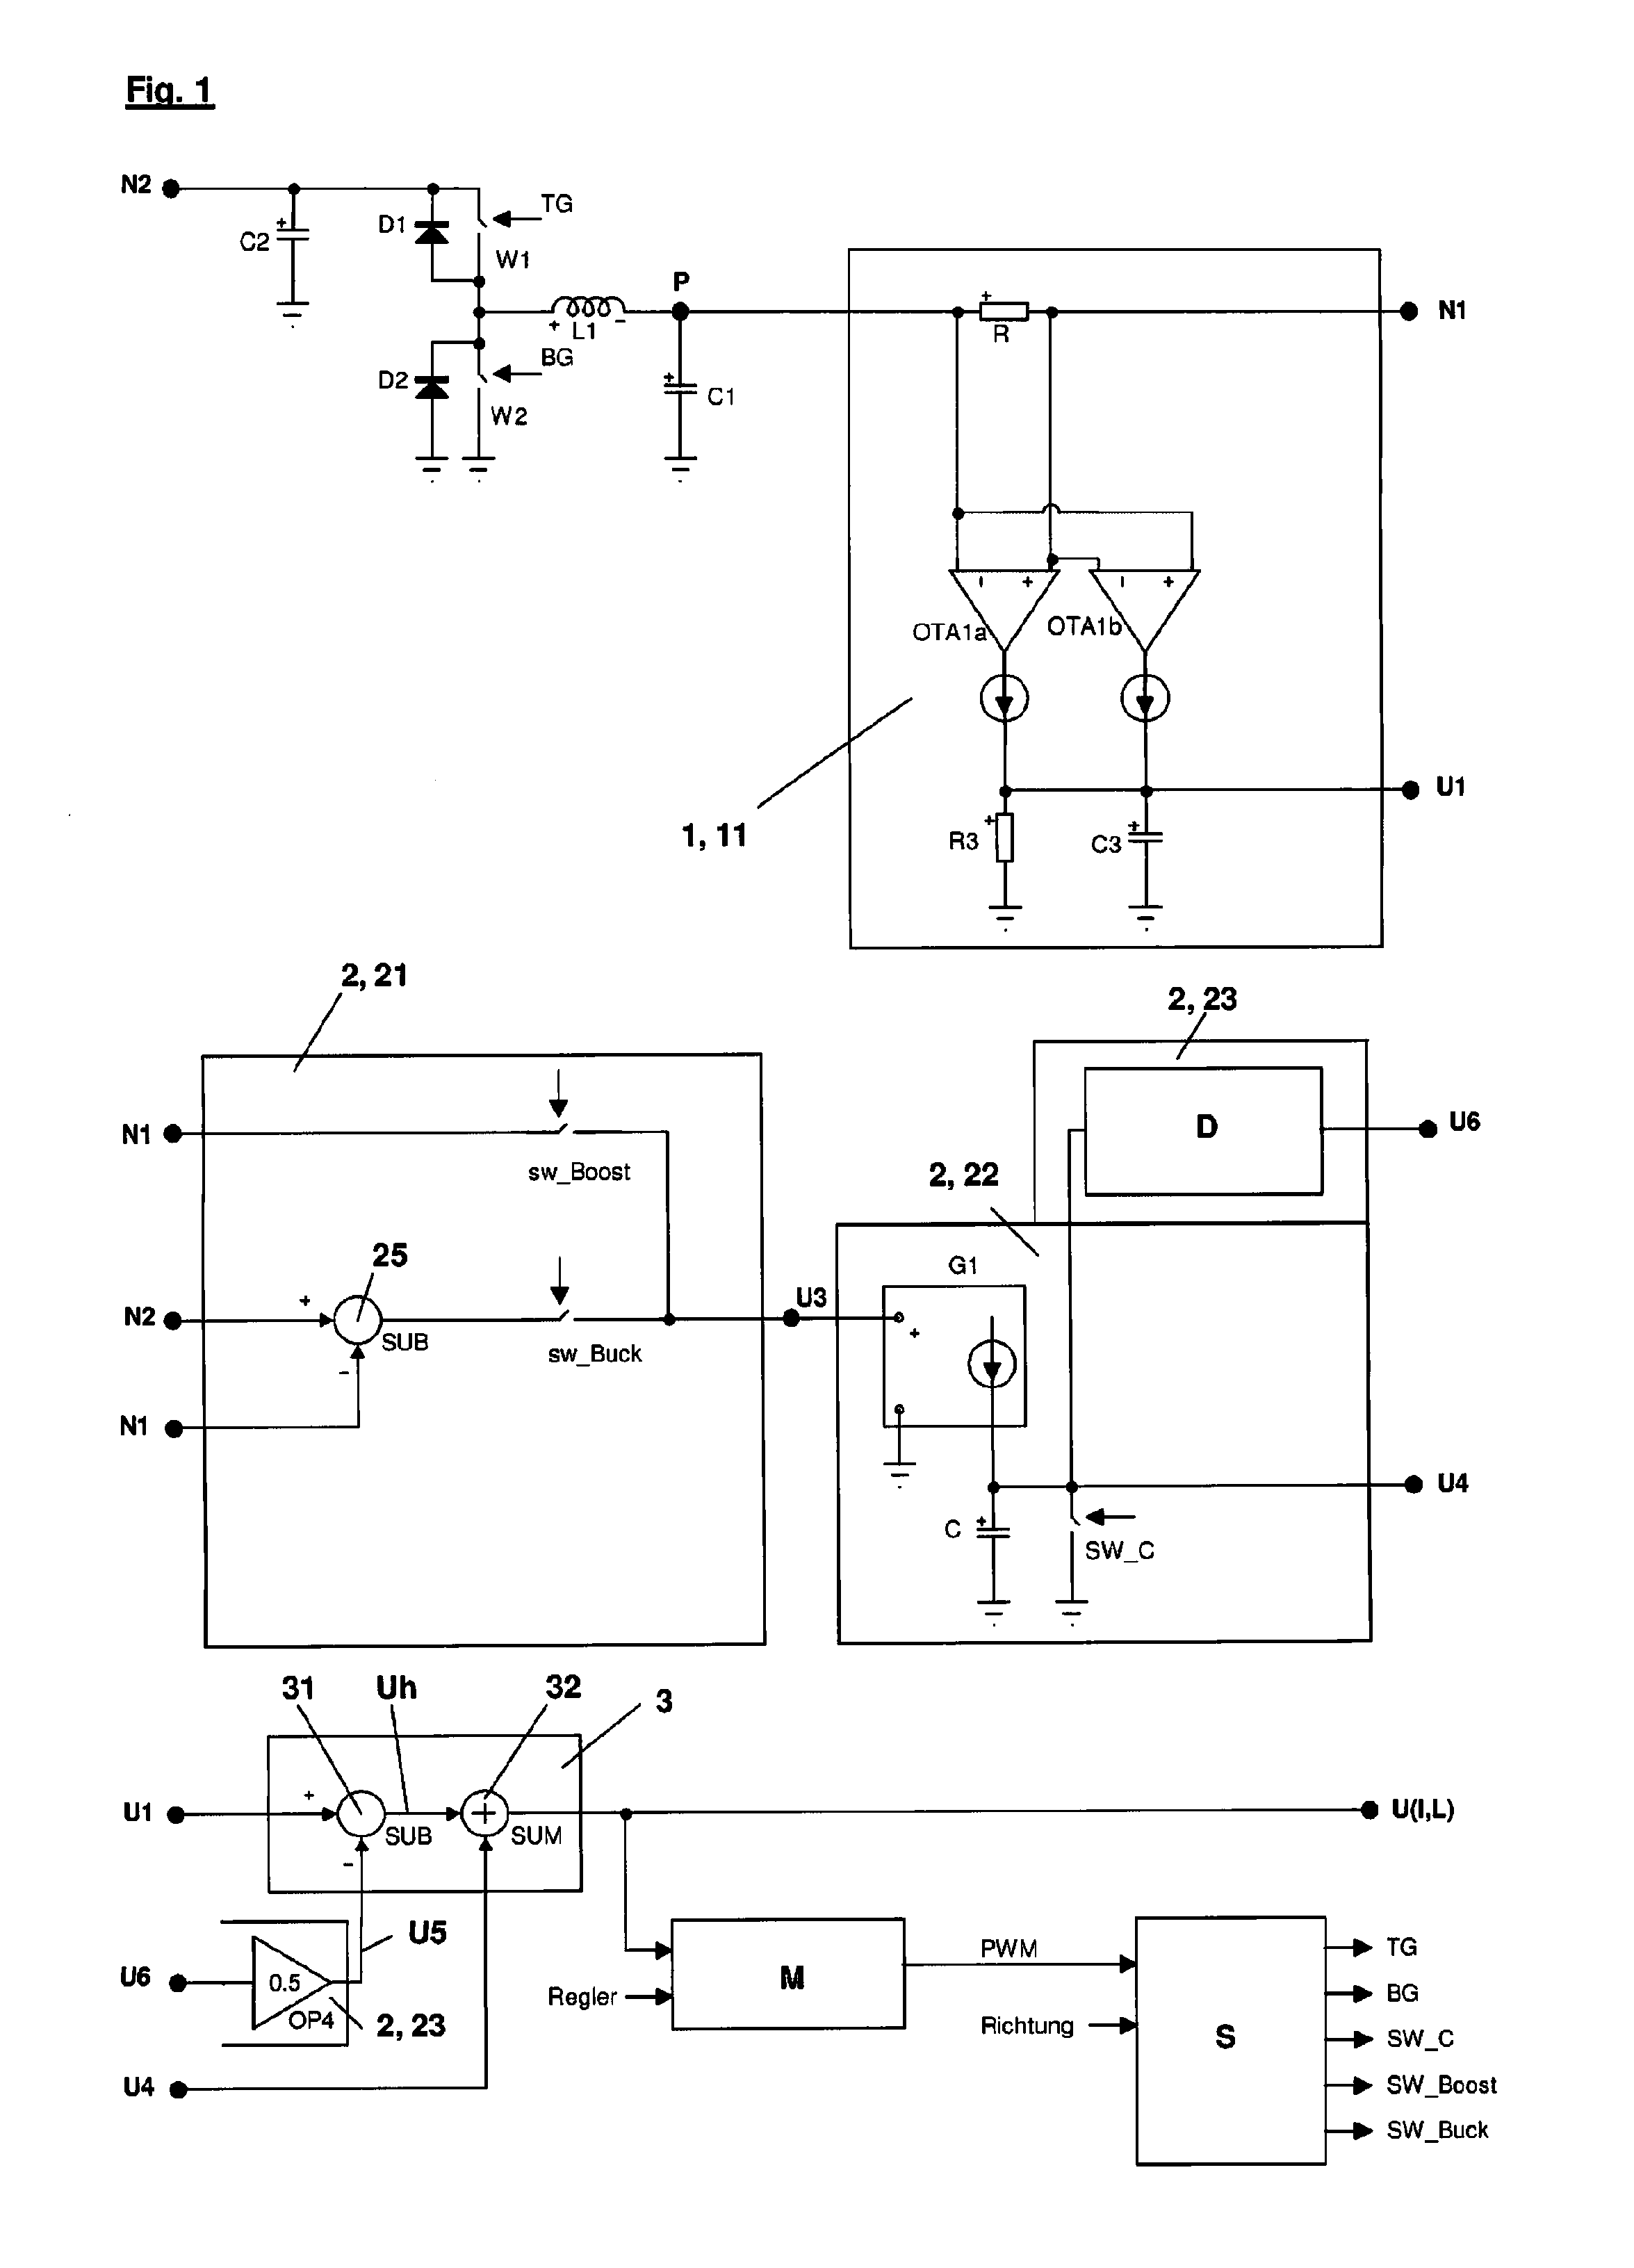 DC-DC Converter With Circuit For Reproducing A Current Flowing Through A Storage Inductor